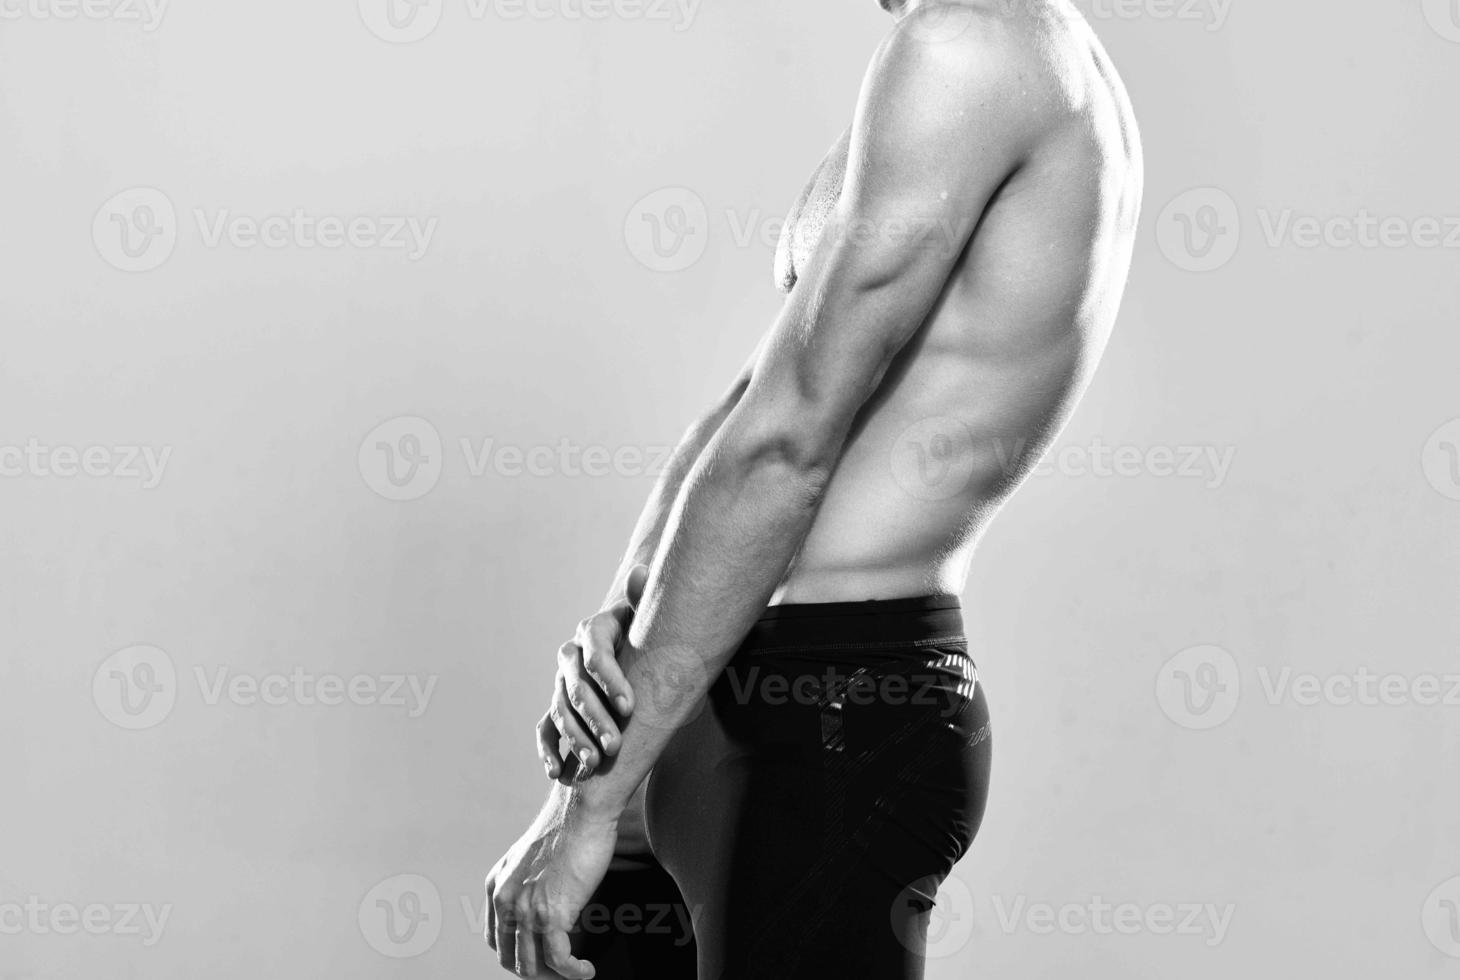 athletic man with muscular body strength exercise photo